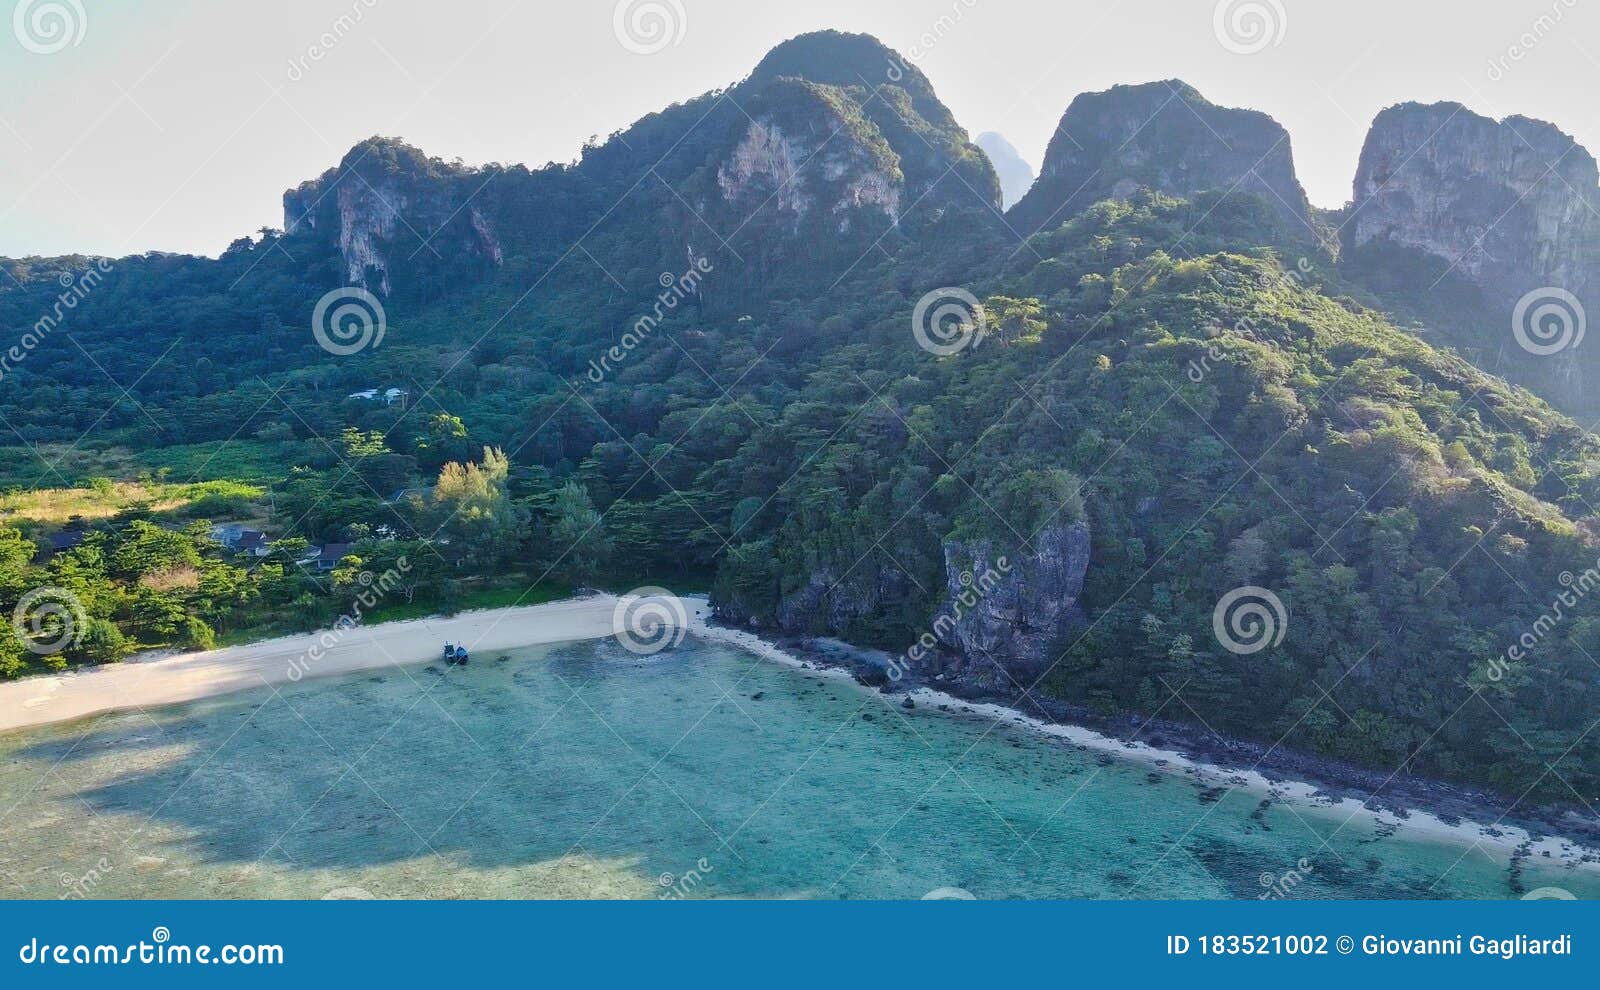 amazing aerial view of loh lana bay in phi phi don, thailand